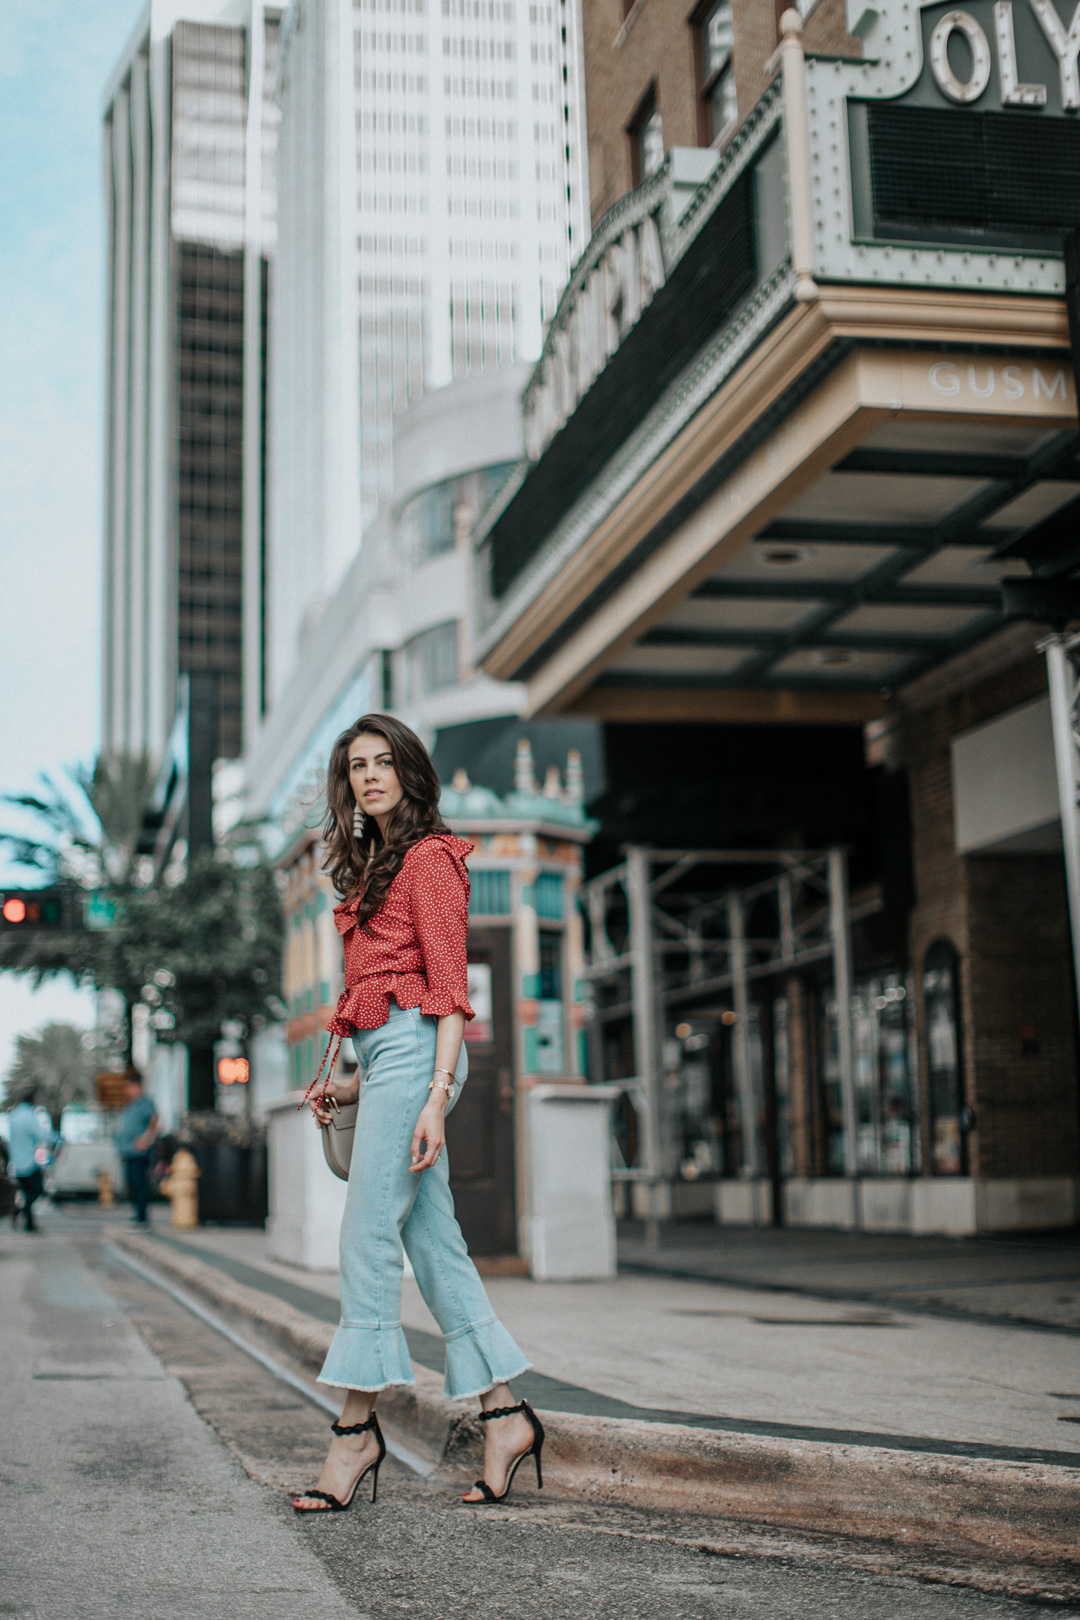 Jackie Roque styling a Frill toyshop look in Downtown Miami.